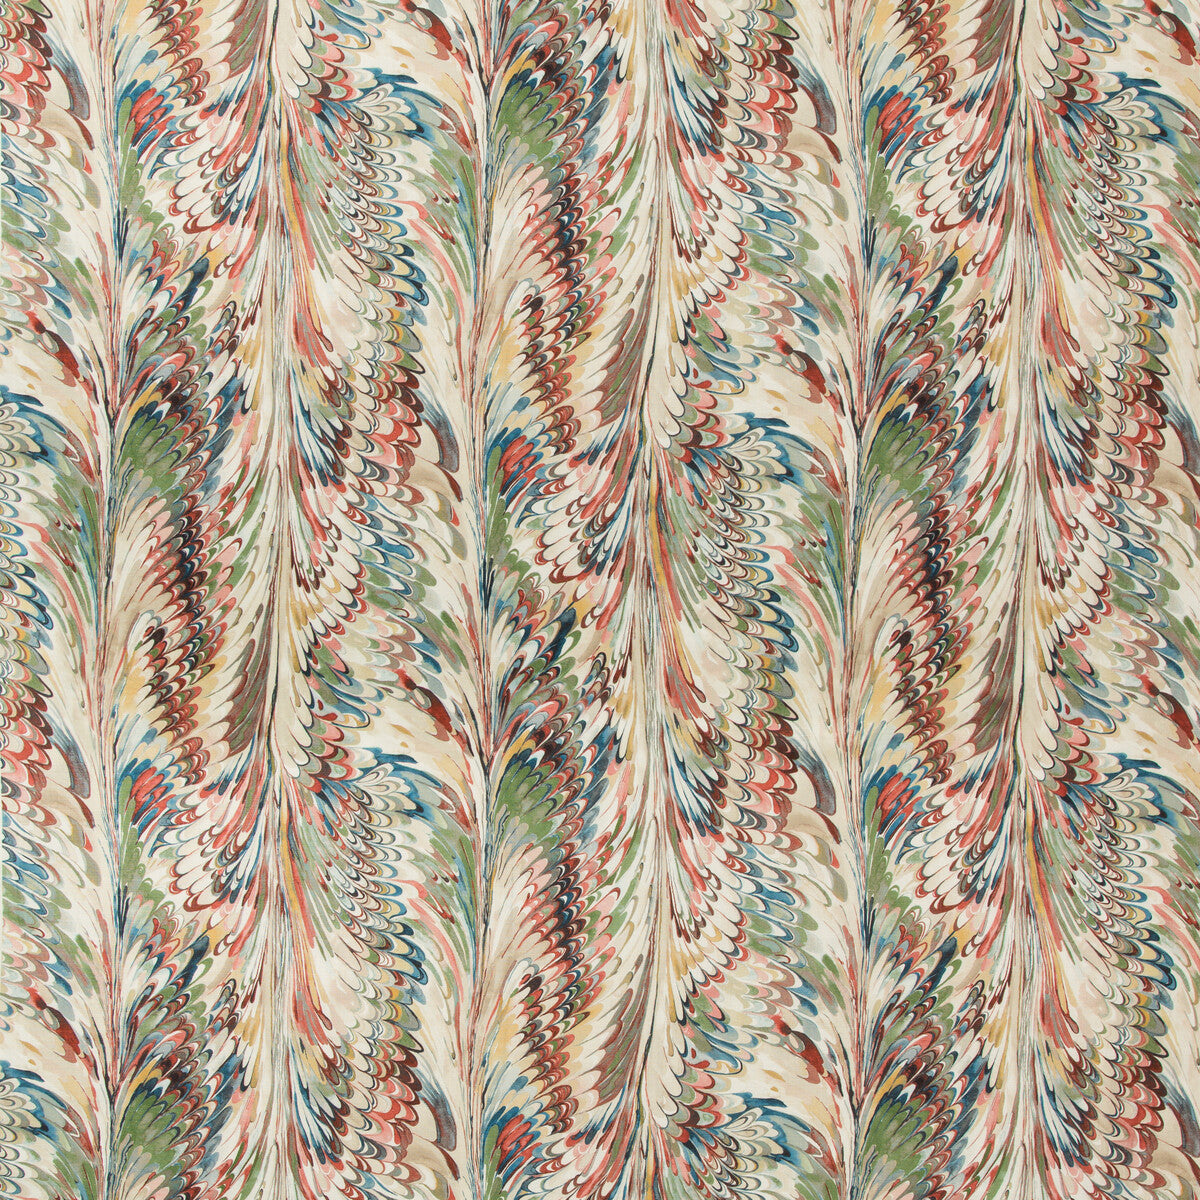 Taplow Print fabric in spice/leaf color - pattern 2019114.139.0 - by Lee Jofa in the Manor House collection